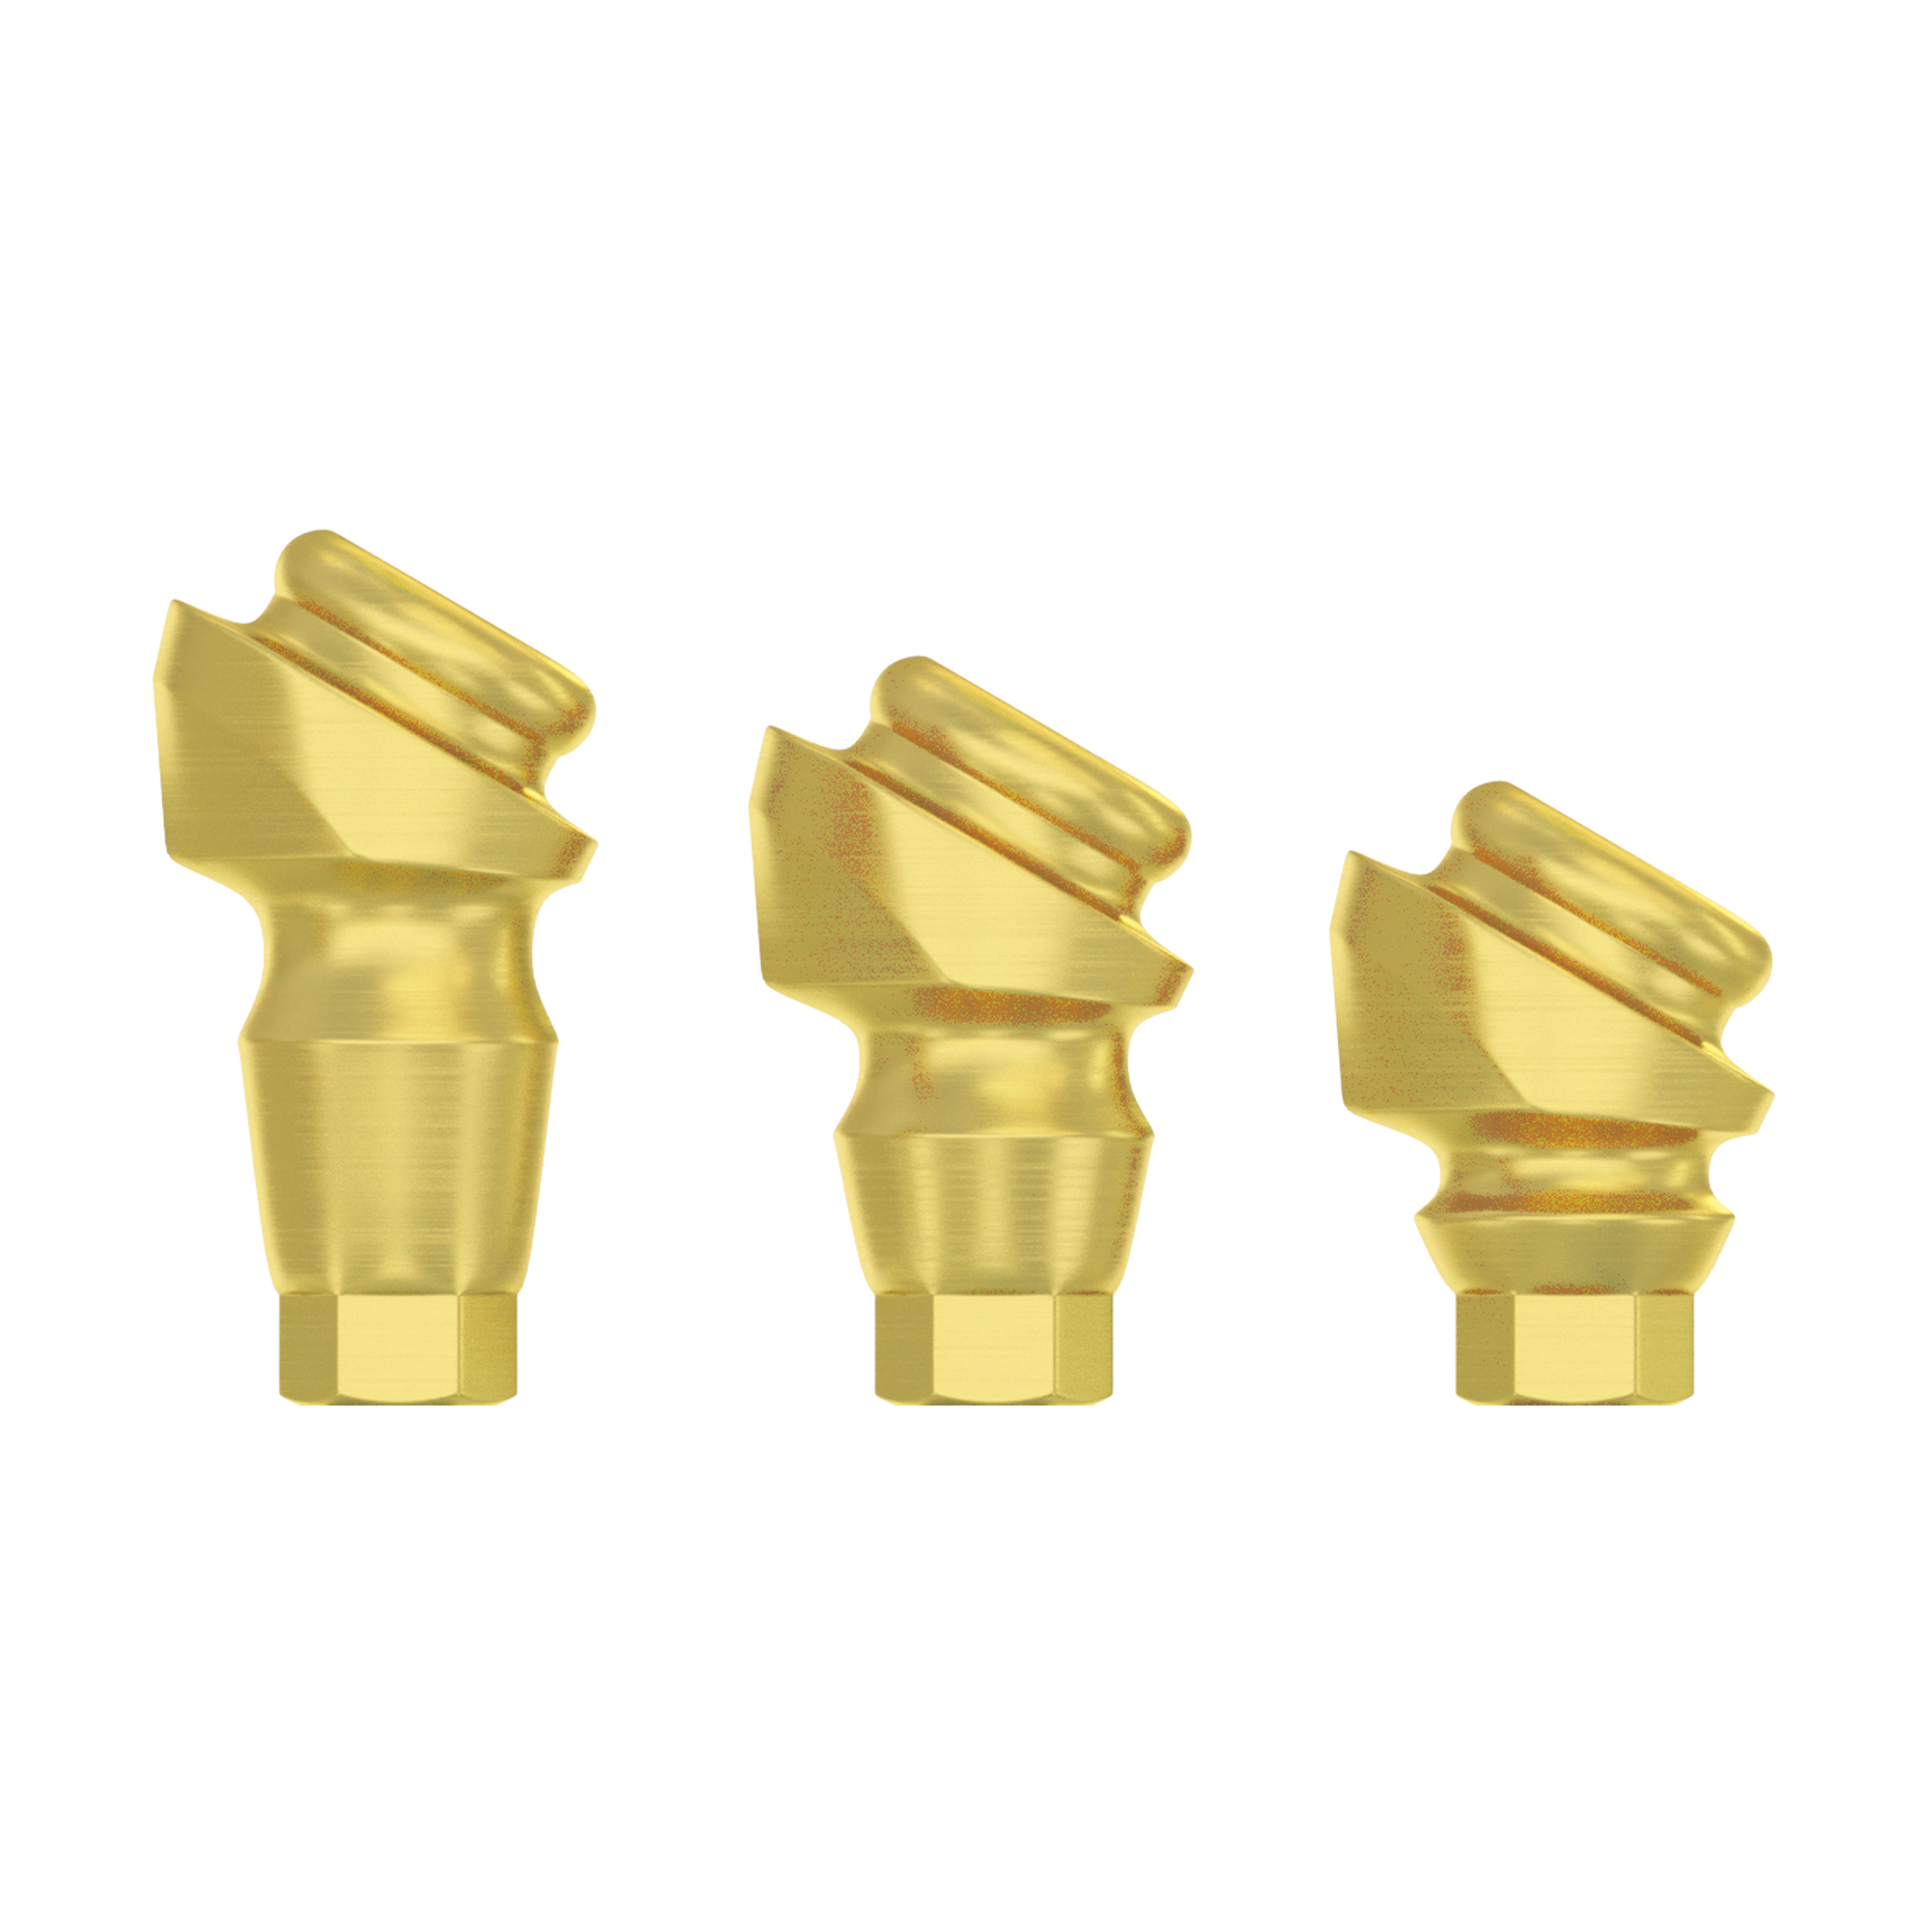 DSI Angulated Loc-in Abutment 5.0mm - Conical Connection RP Ø4.3-5.0mm